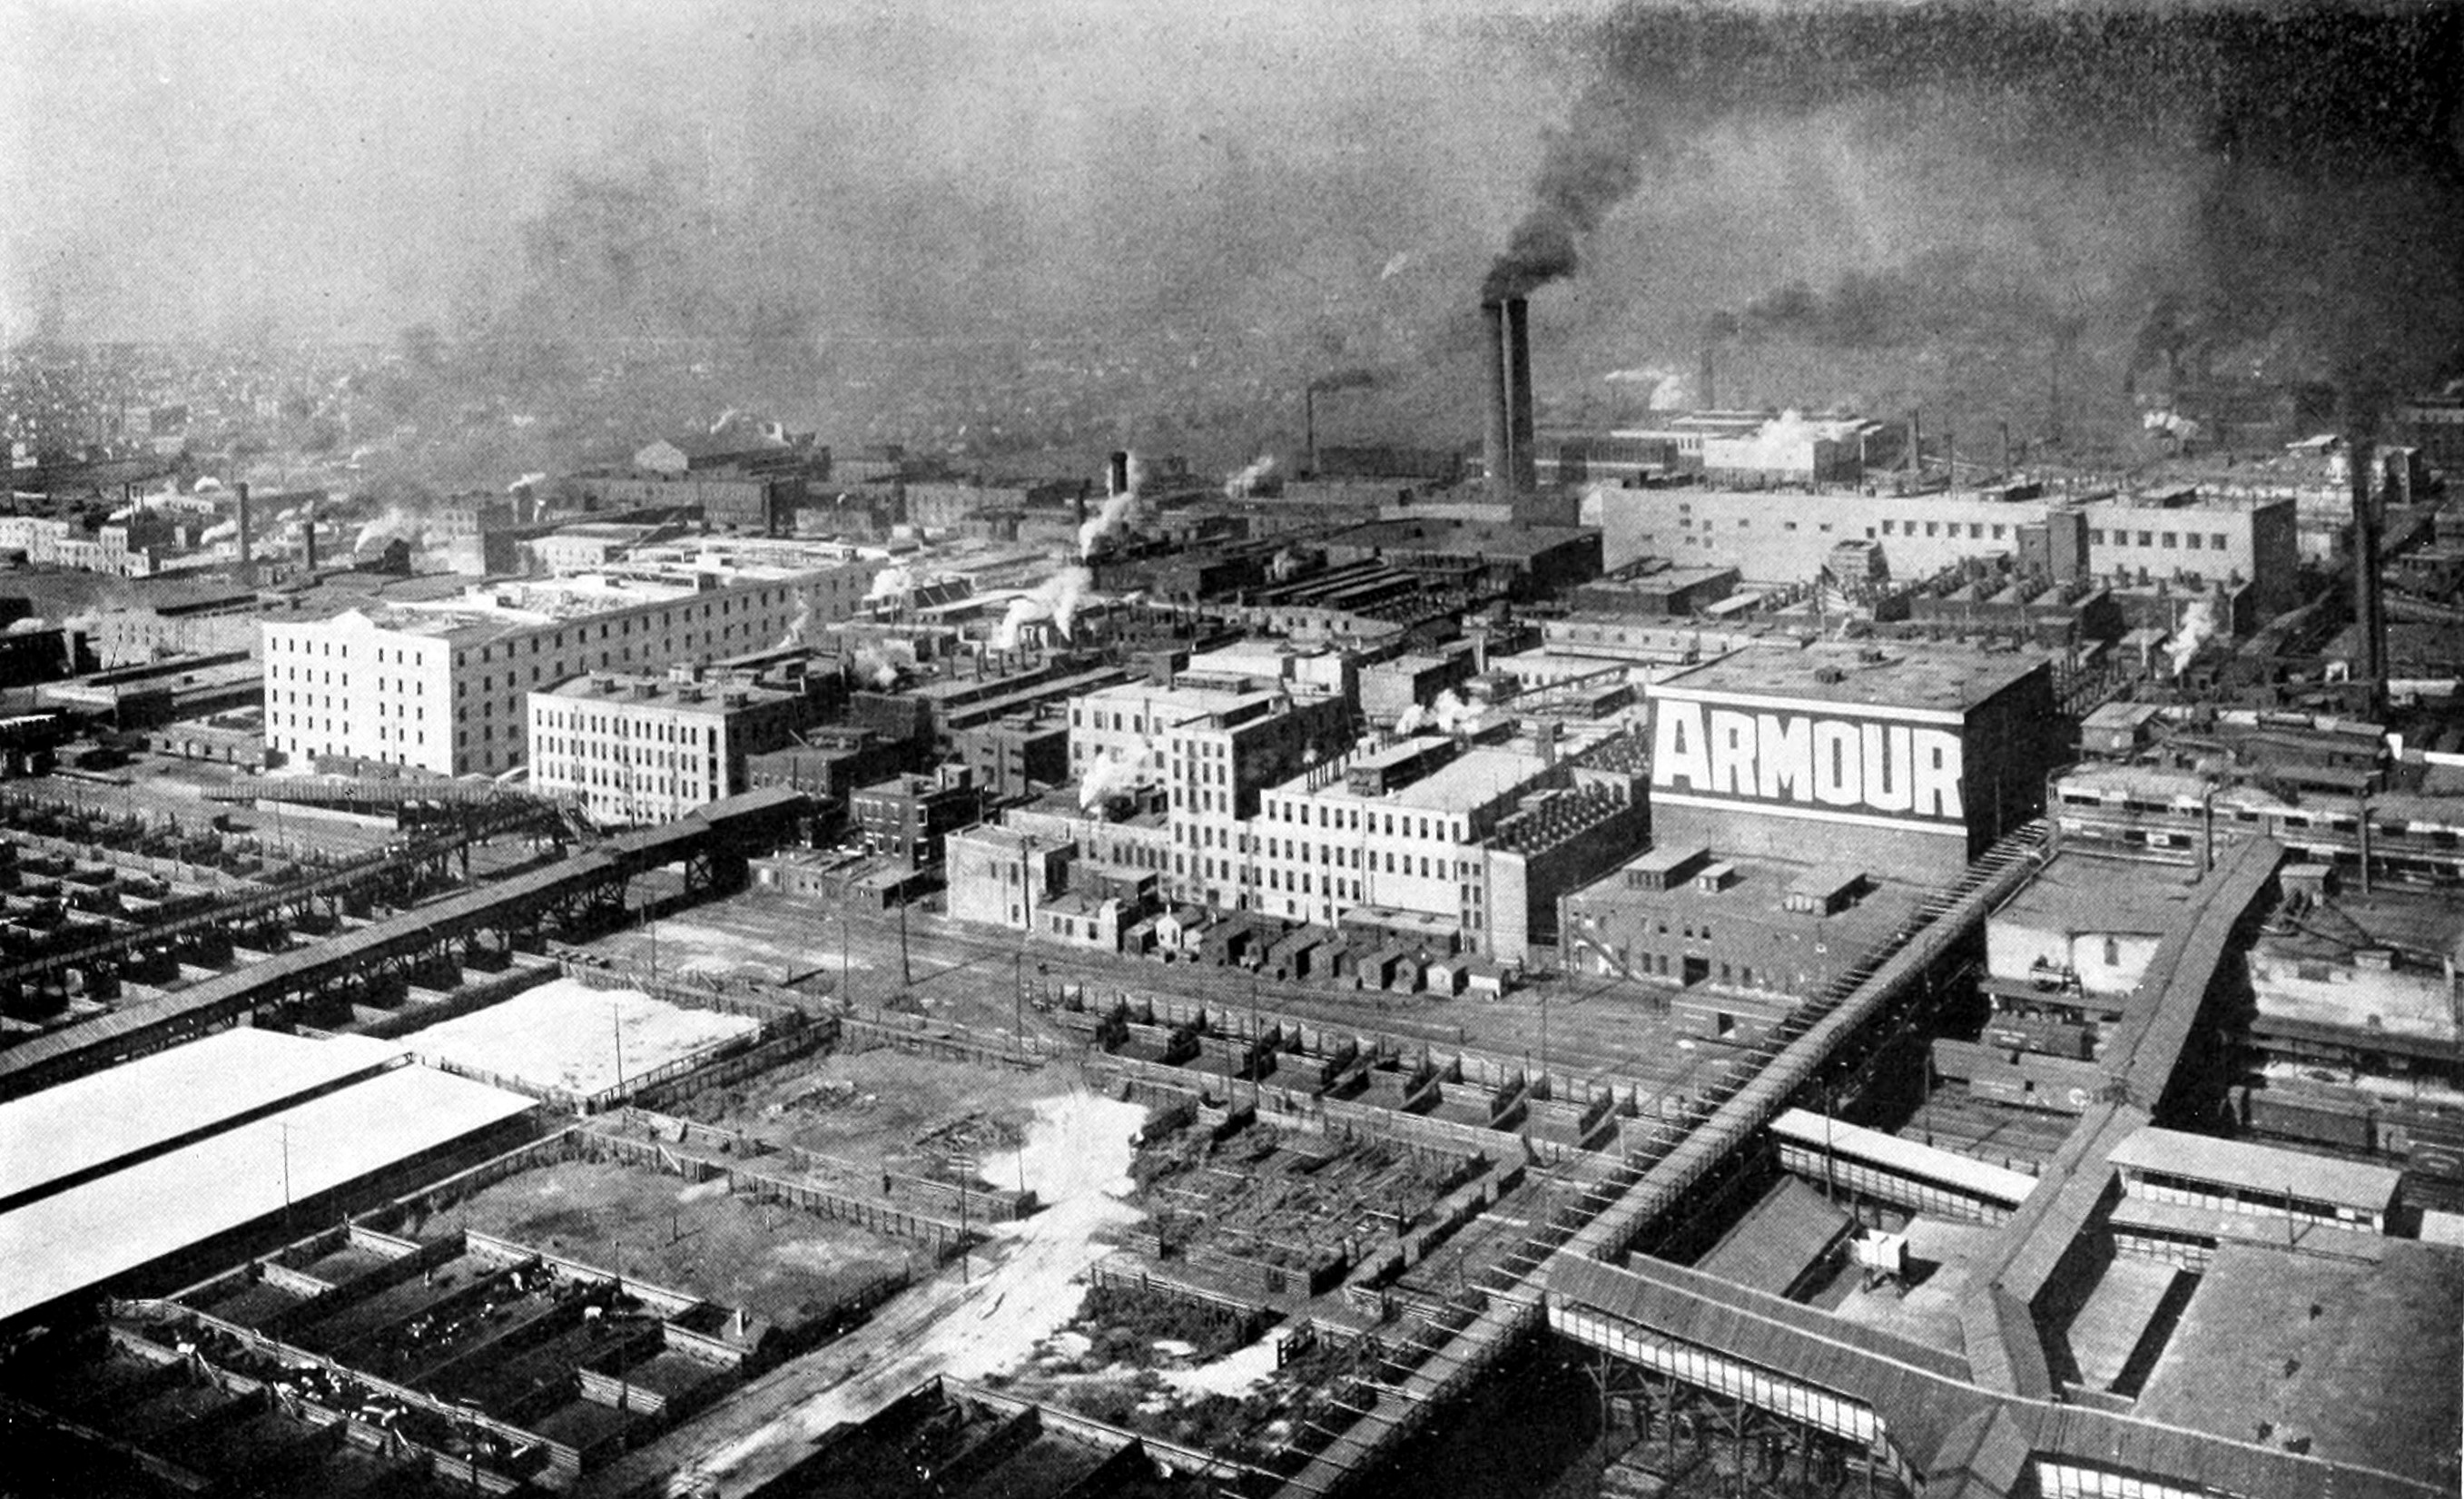 View of Armour’s plant and stockyards from a balloon, circa 1910. (Wikimedia)